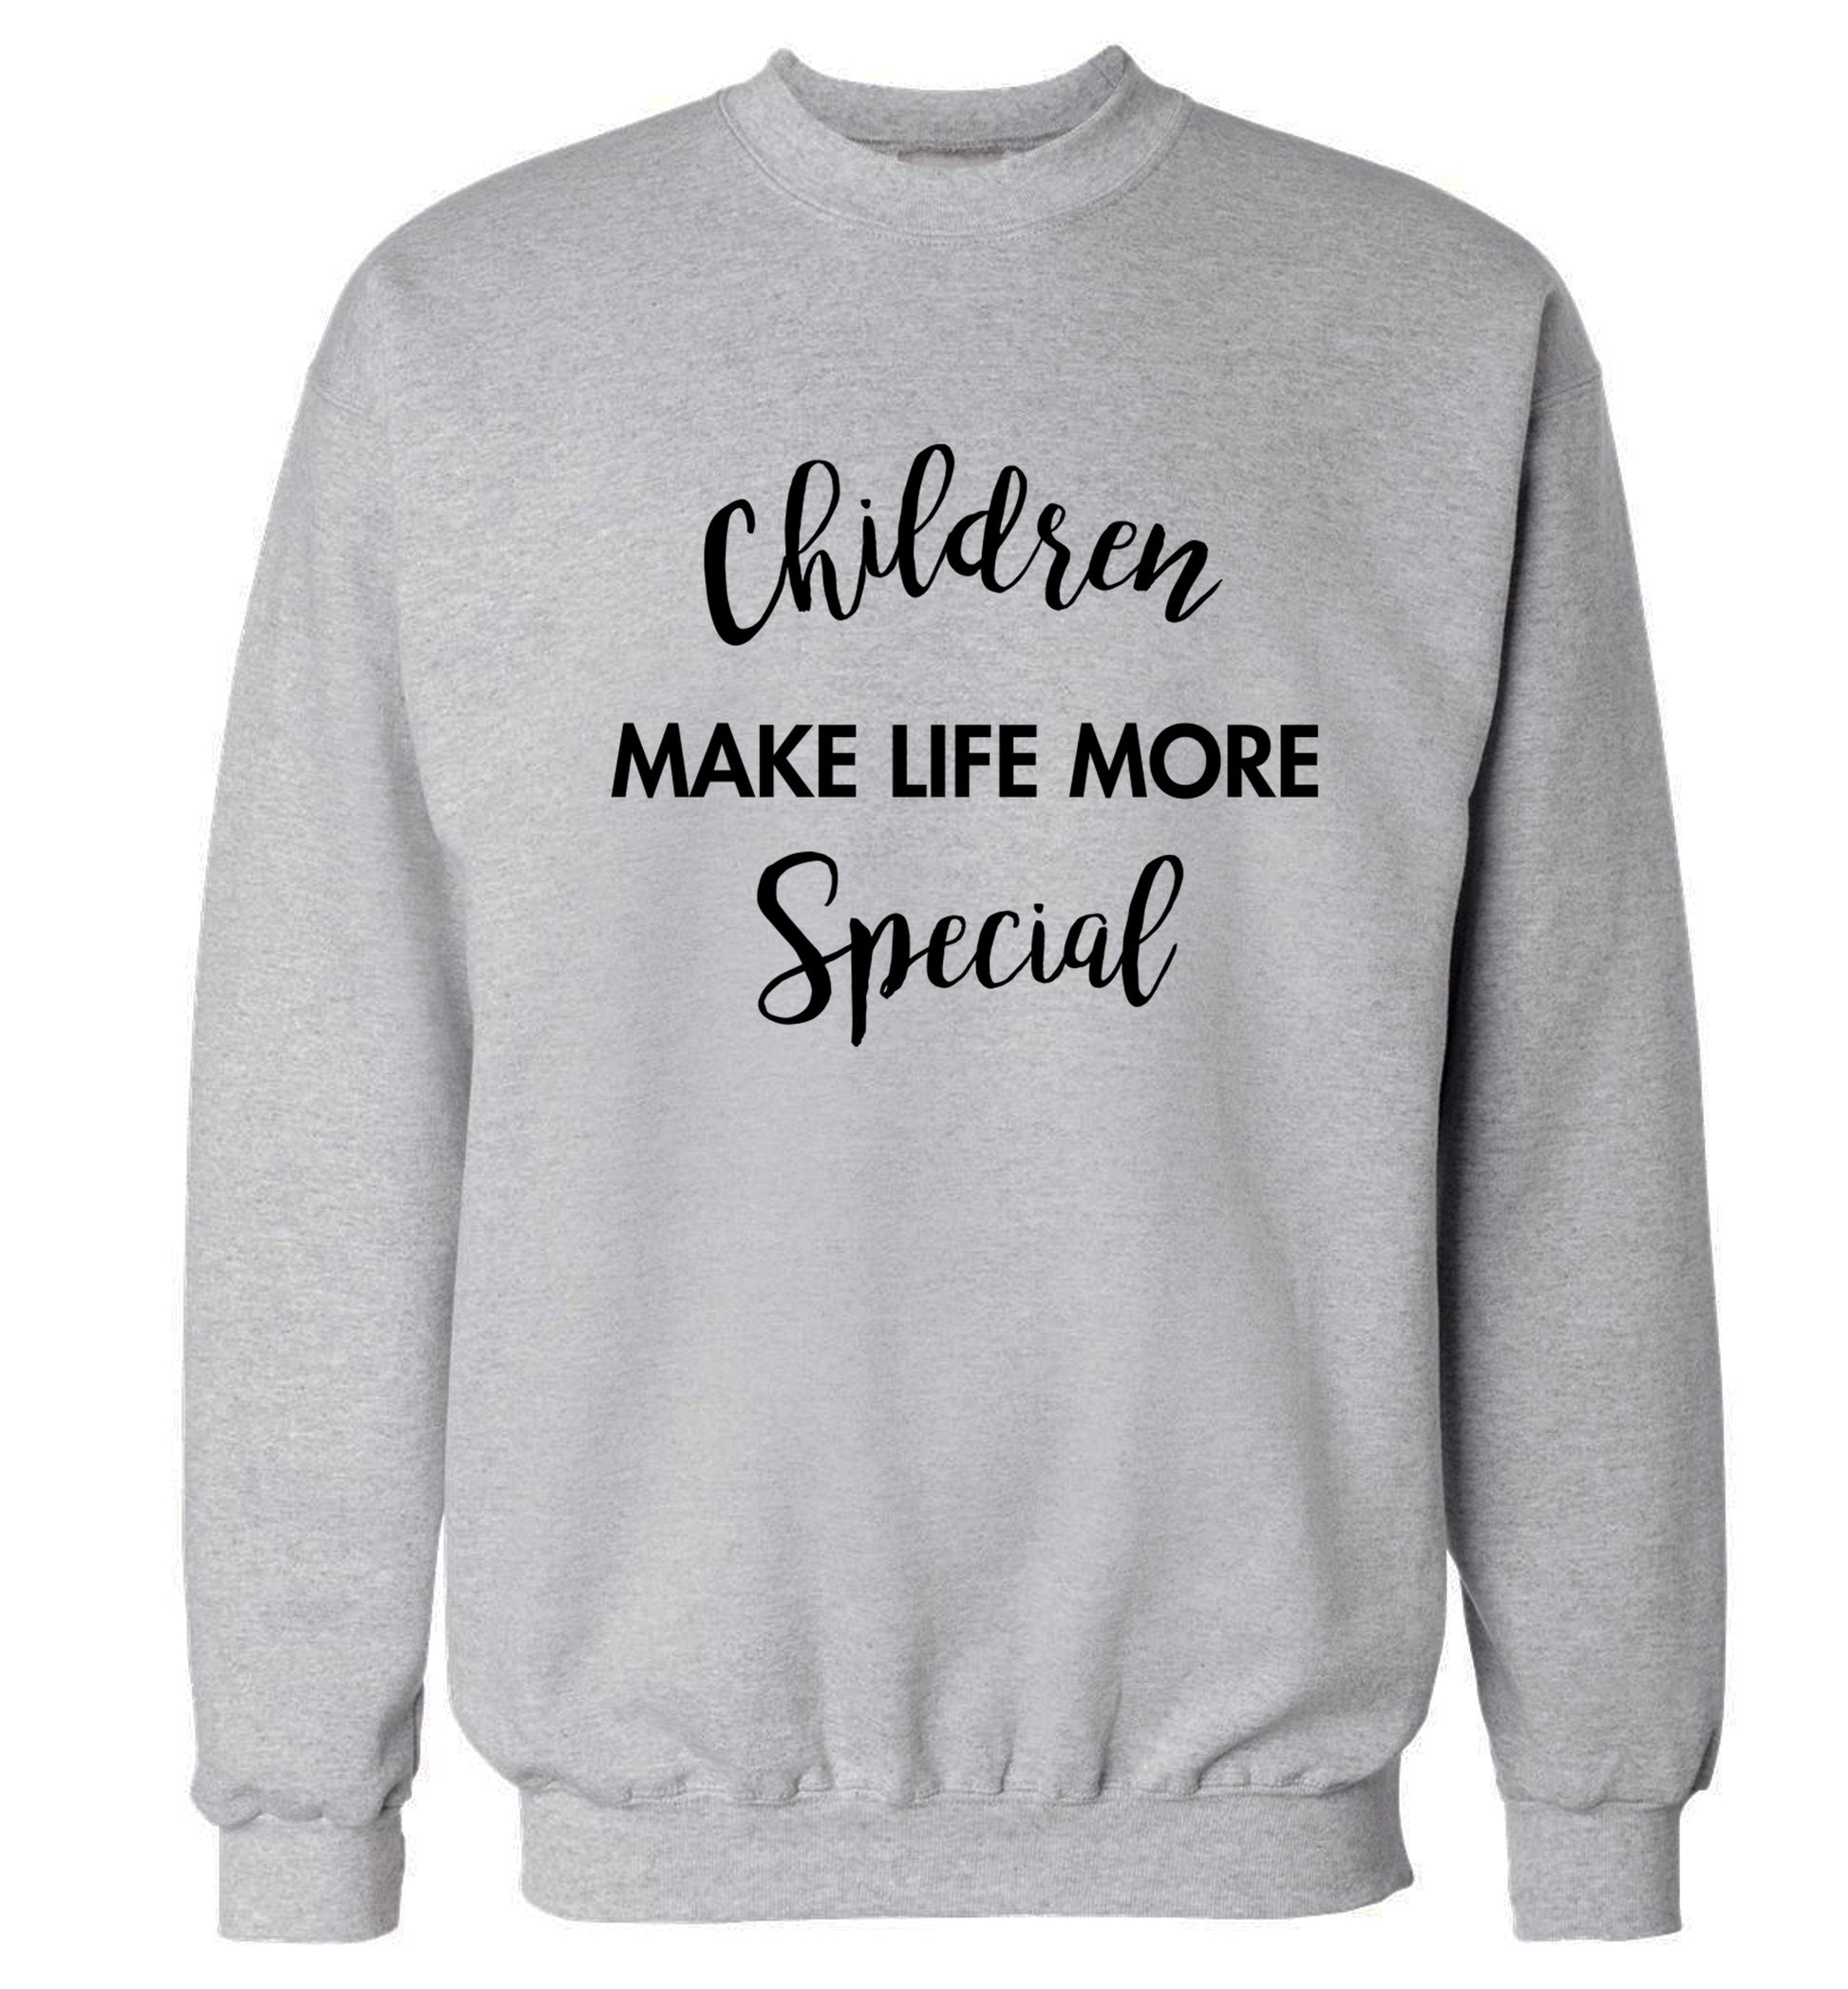 Children make life more special Adult's unisex grey Sweater 2XL